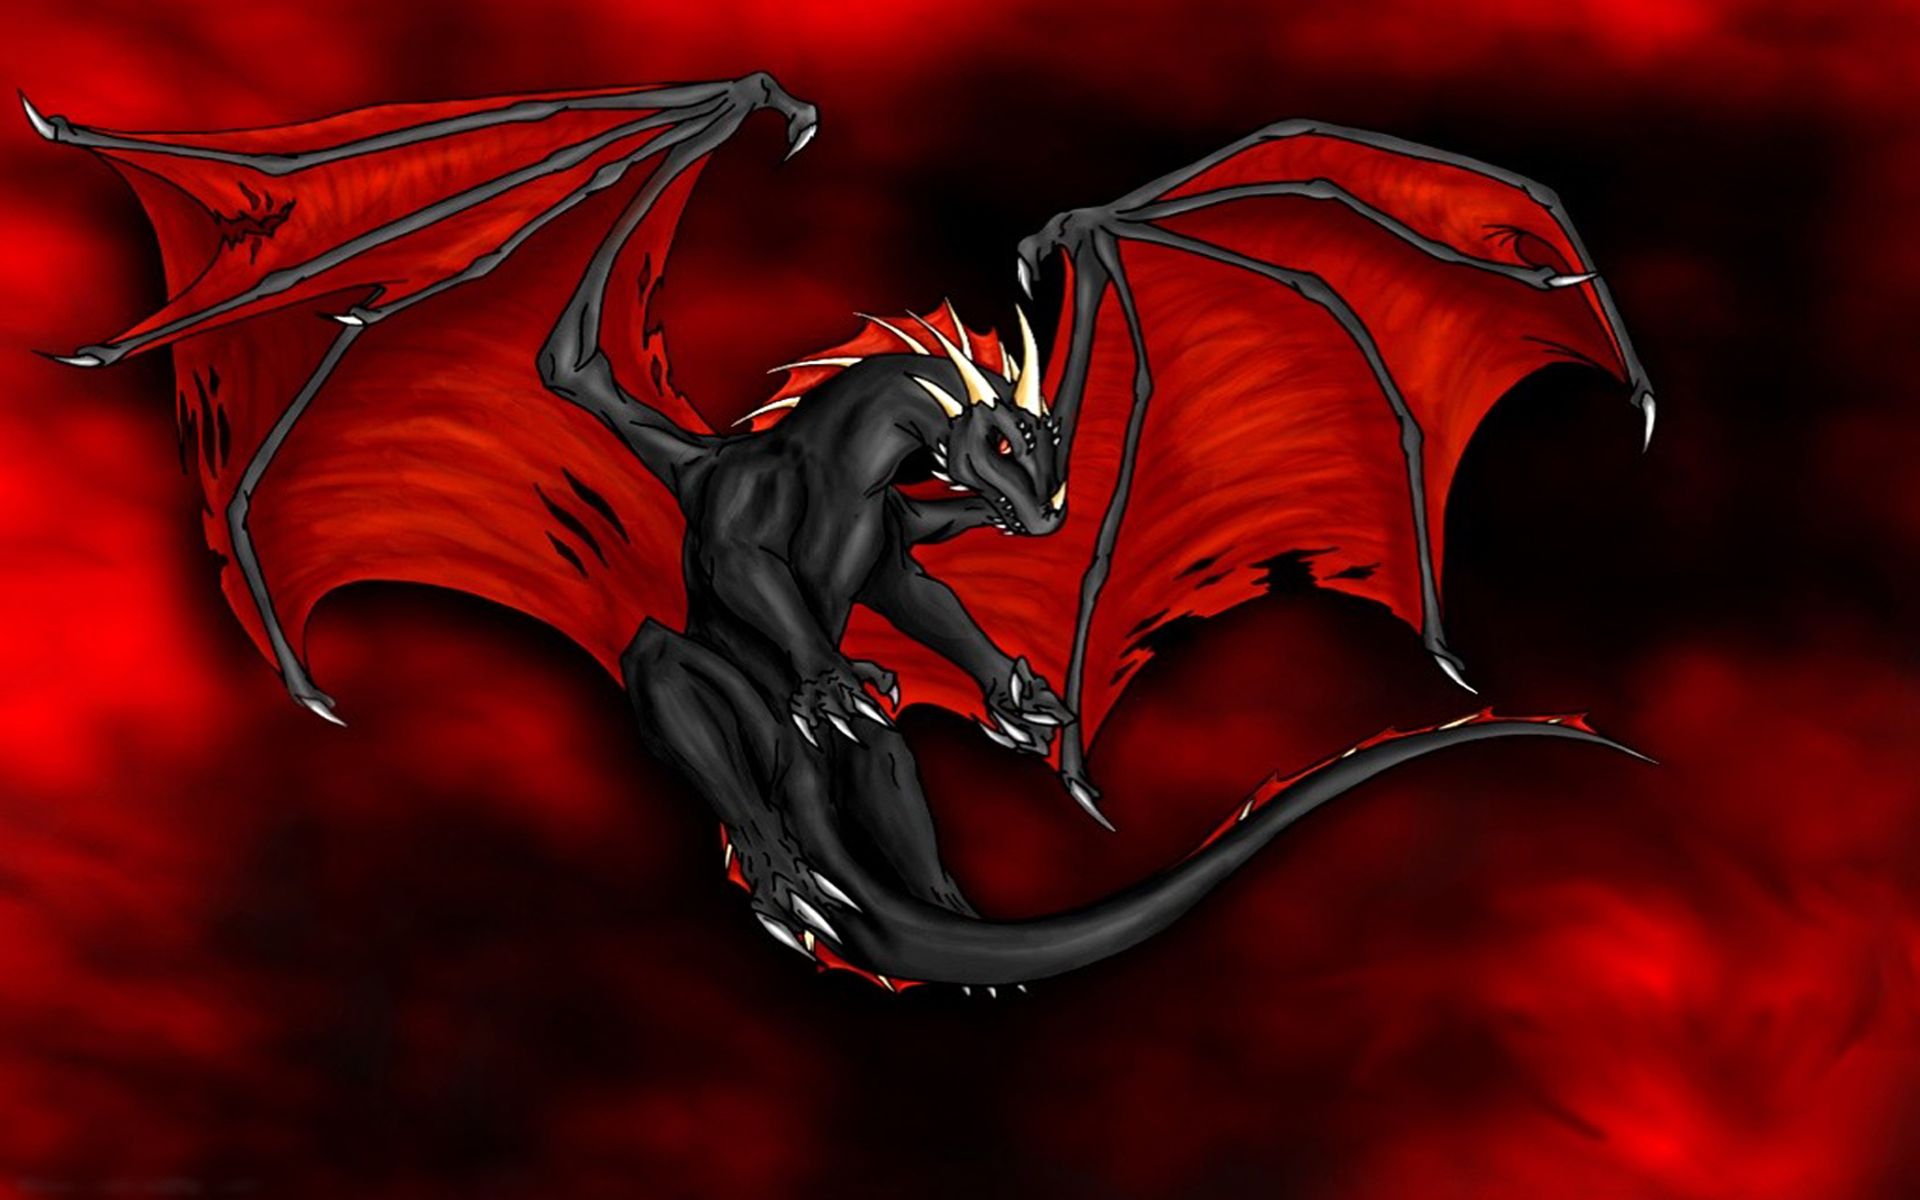 fantasy, dragon, claws, flying, red, wings